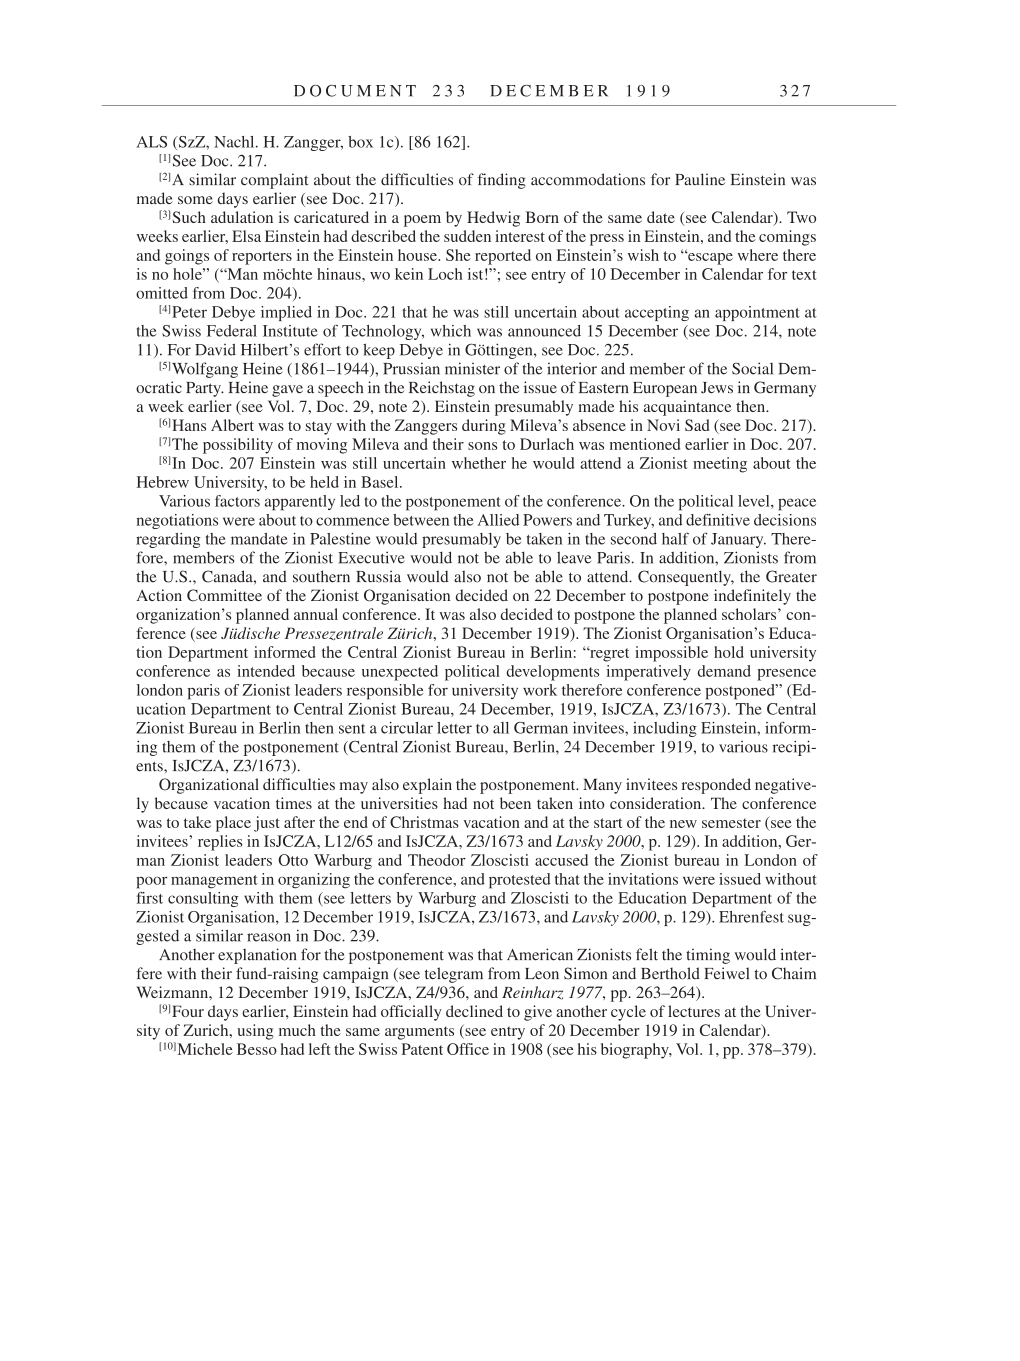 Volume 9: The Berlin Years: Correspondence January 1919-April 1920 page 327